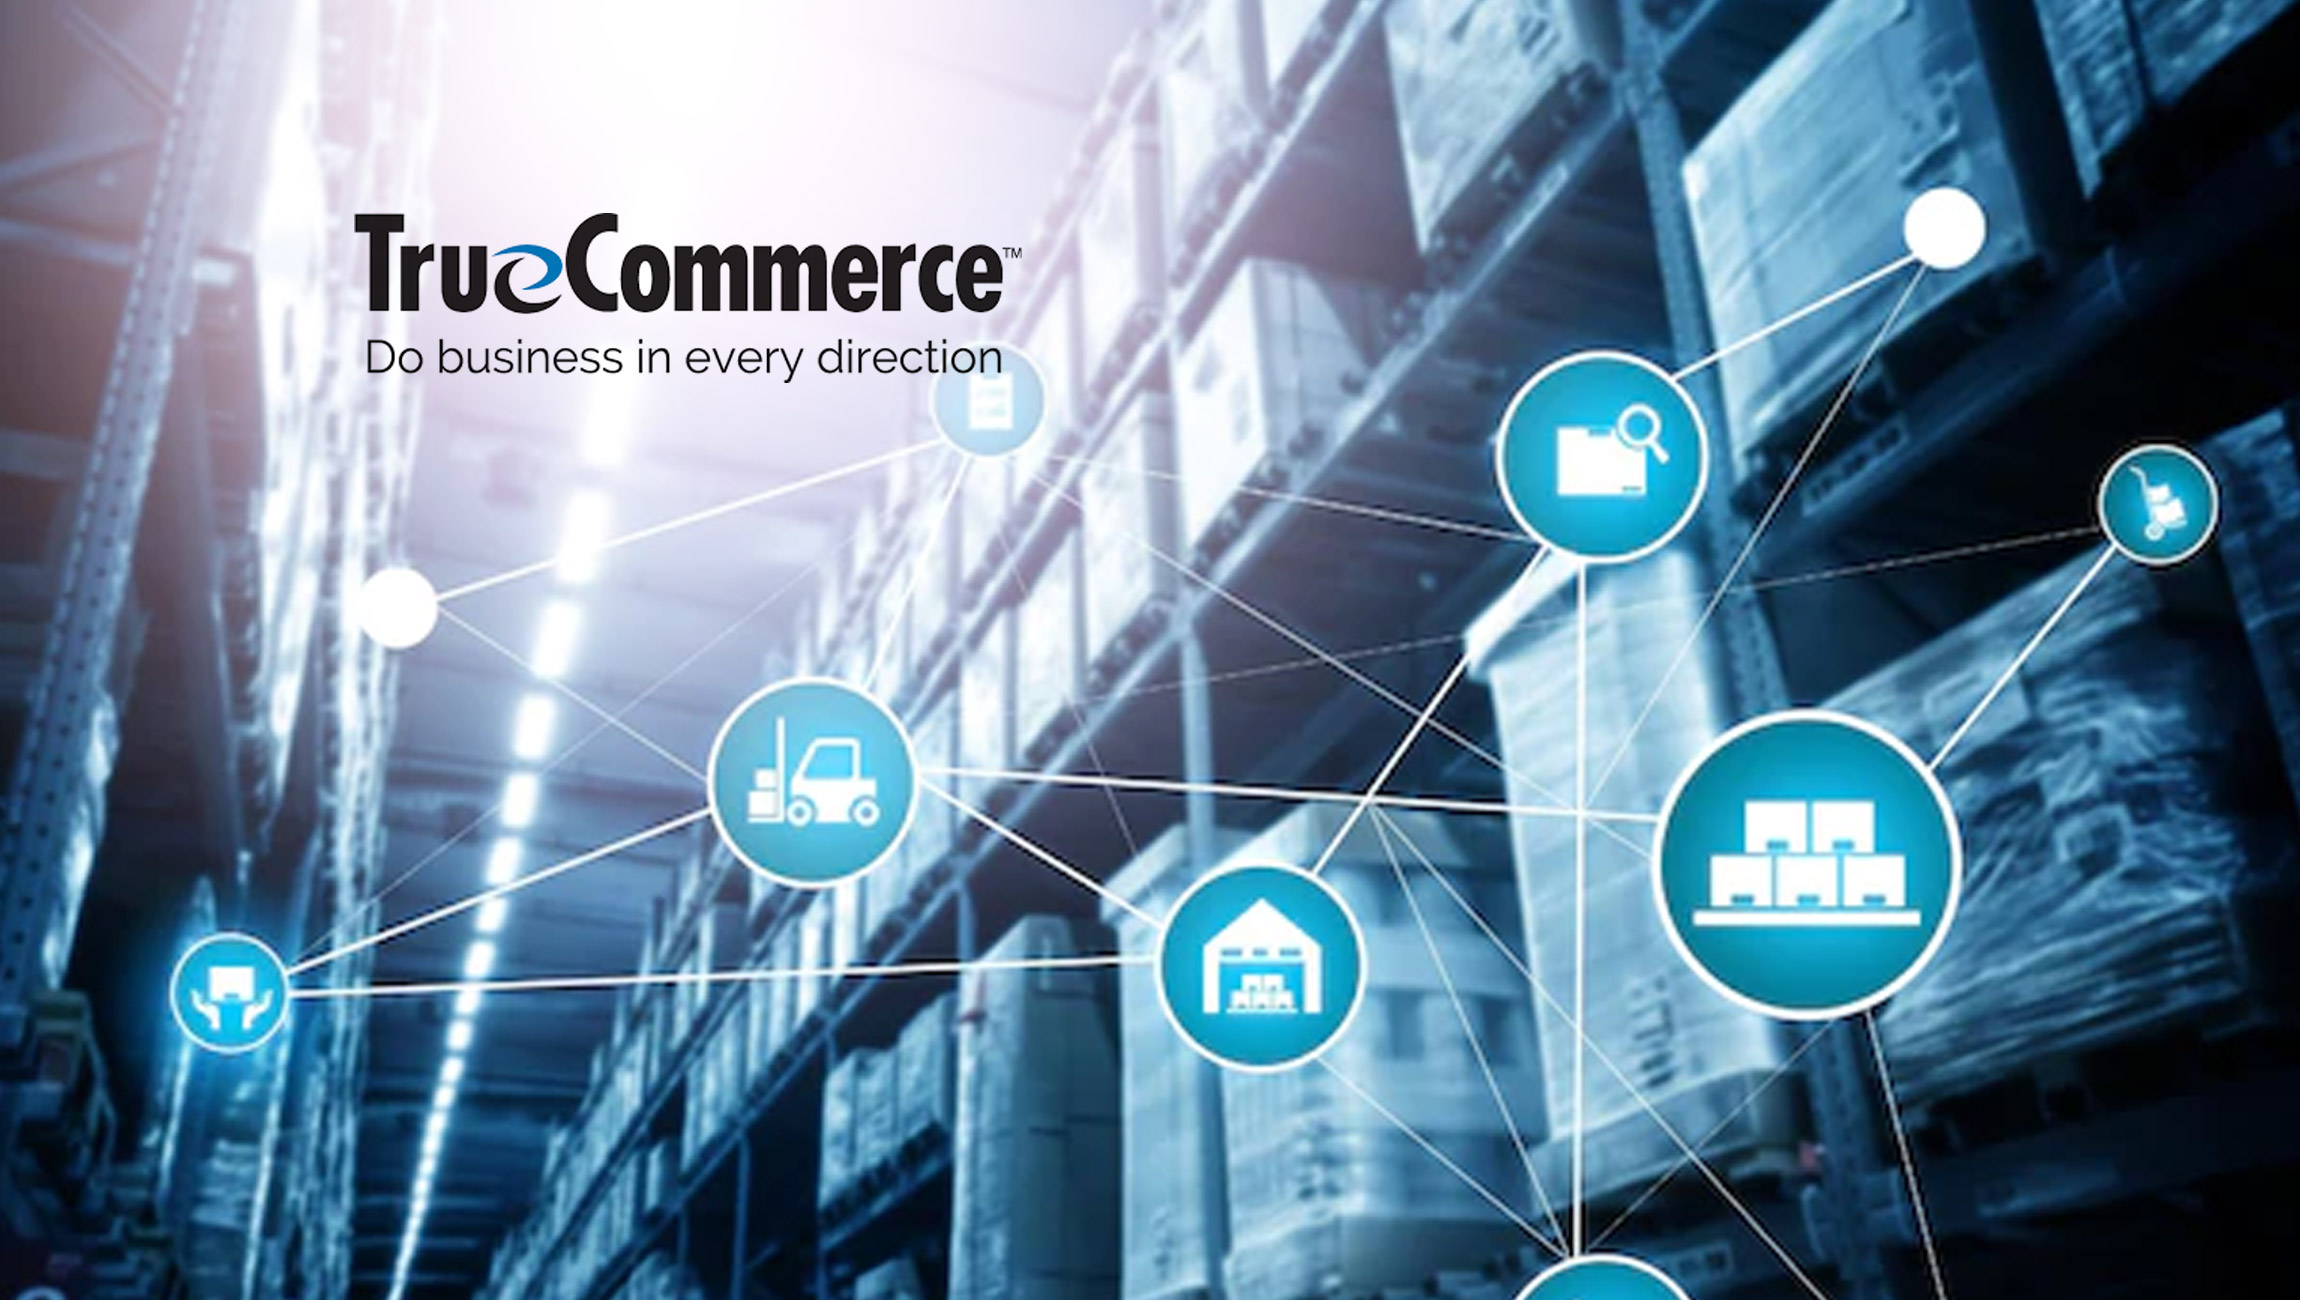 TrueCommerce-DiCentral-Helps-Customers-Harness-the-Power-of-Digitized-Supply-Chain-Management-for-the-Automotive-Industry-at-the-Oracle-Industry-Lab